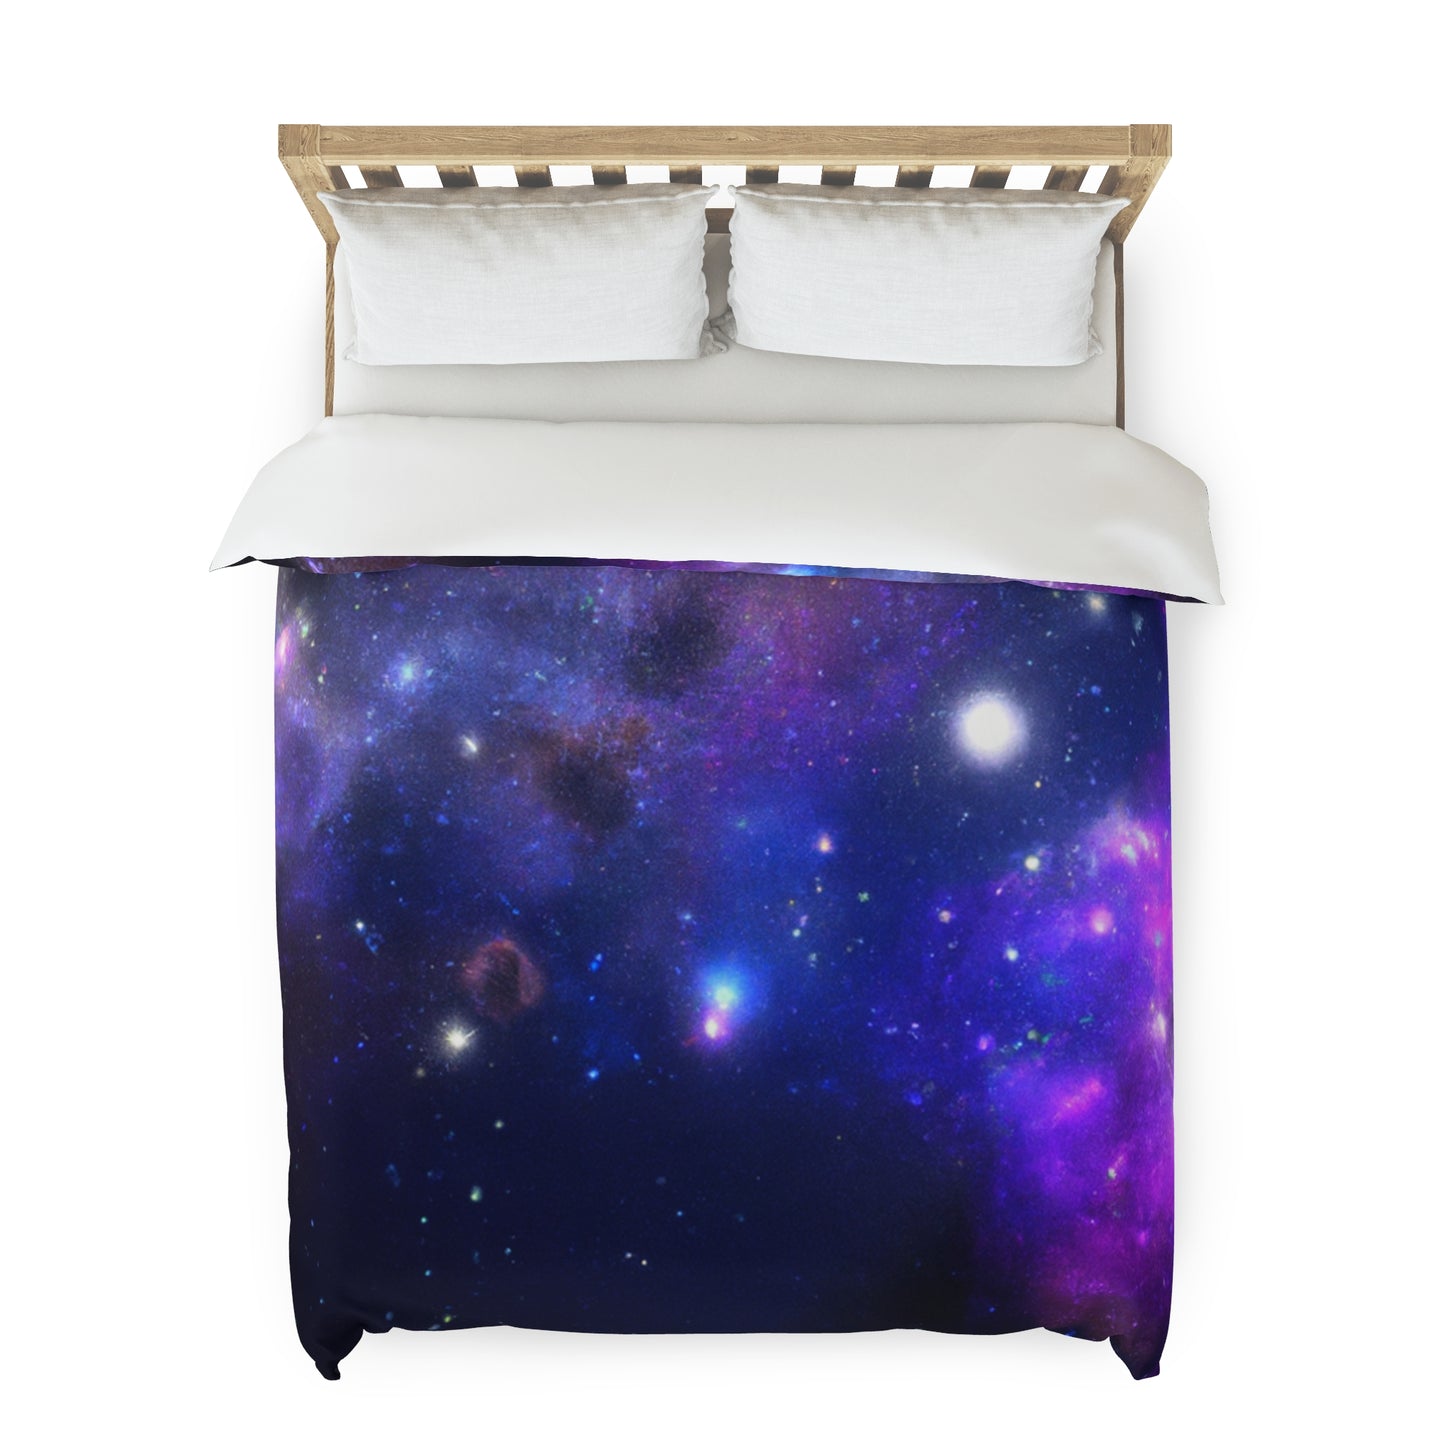 The Dream of Silver Stardust - Astronomy Duvet Bed Cover